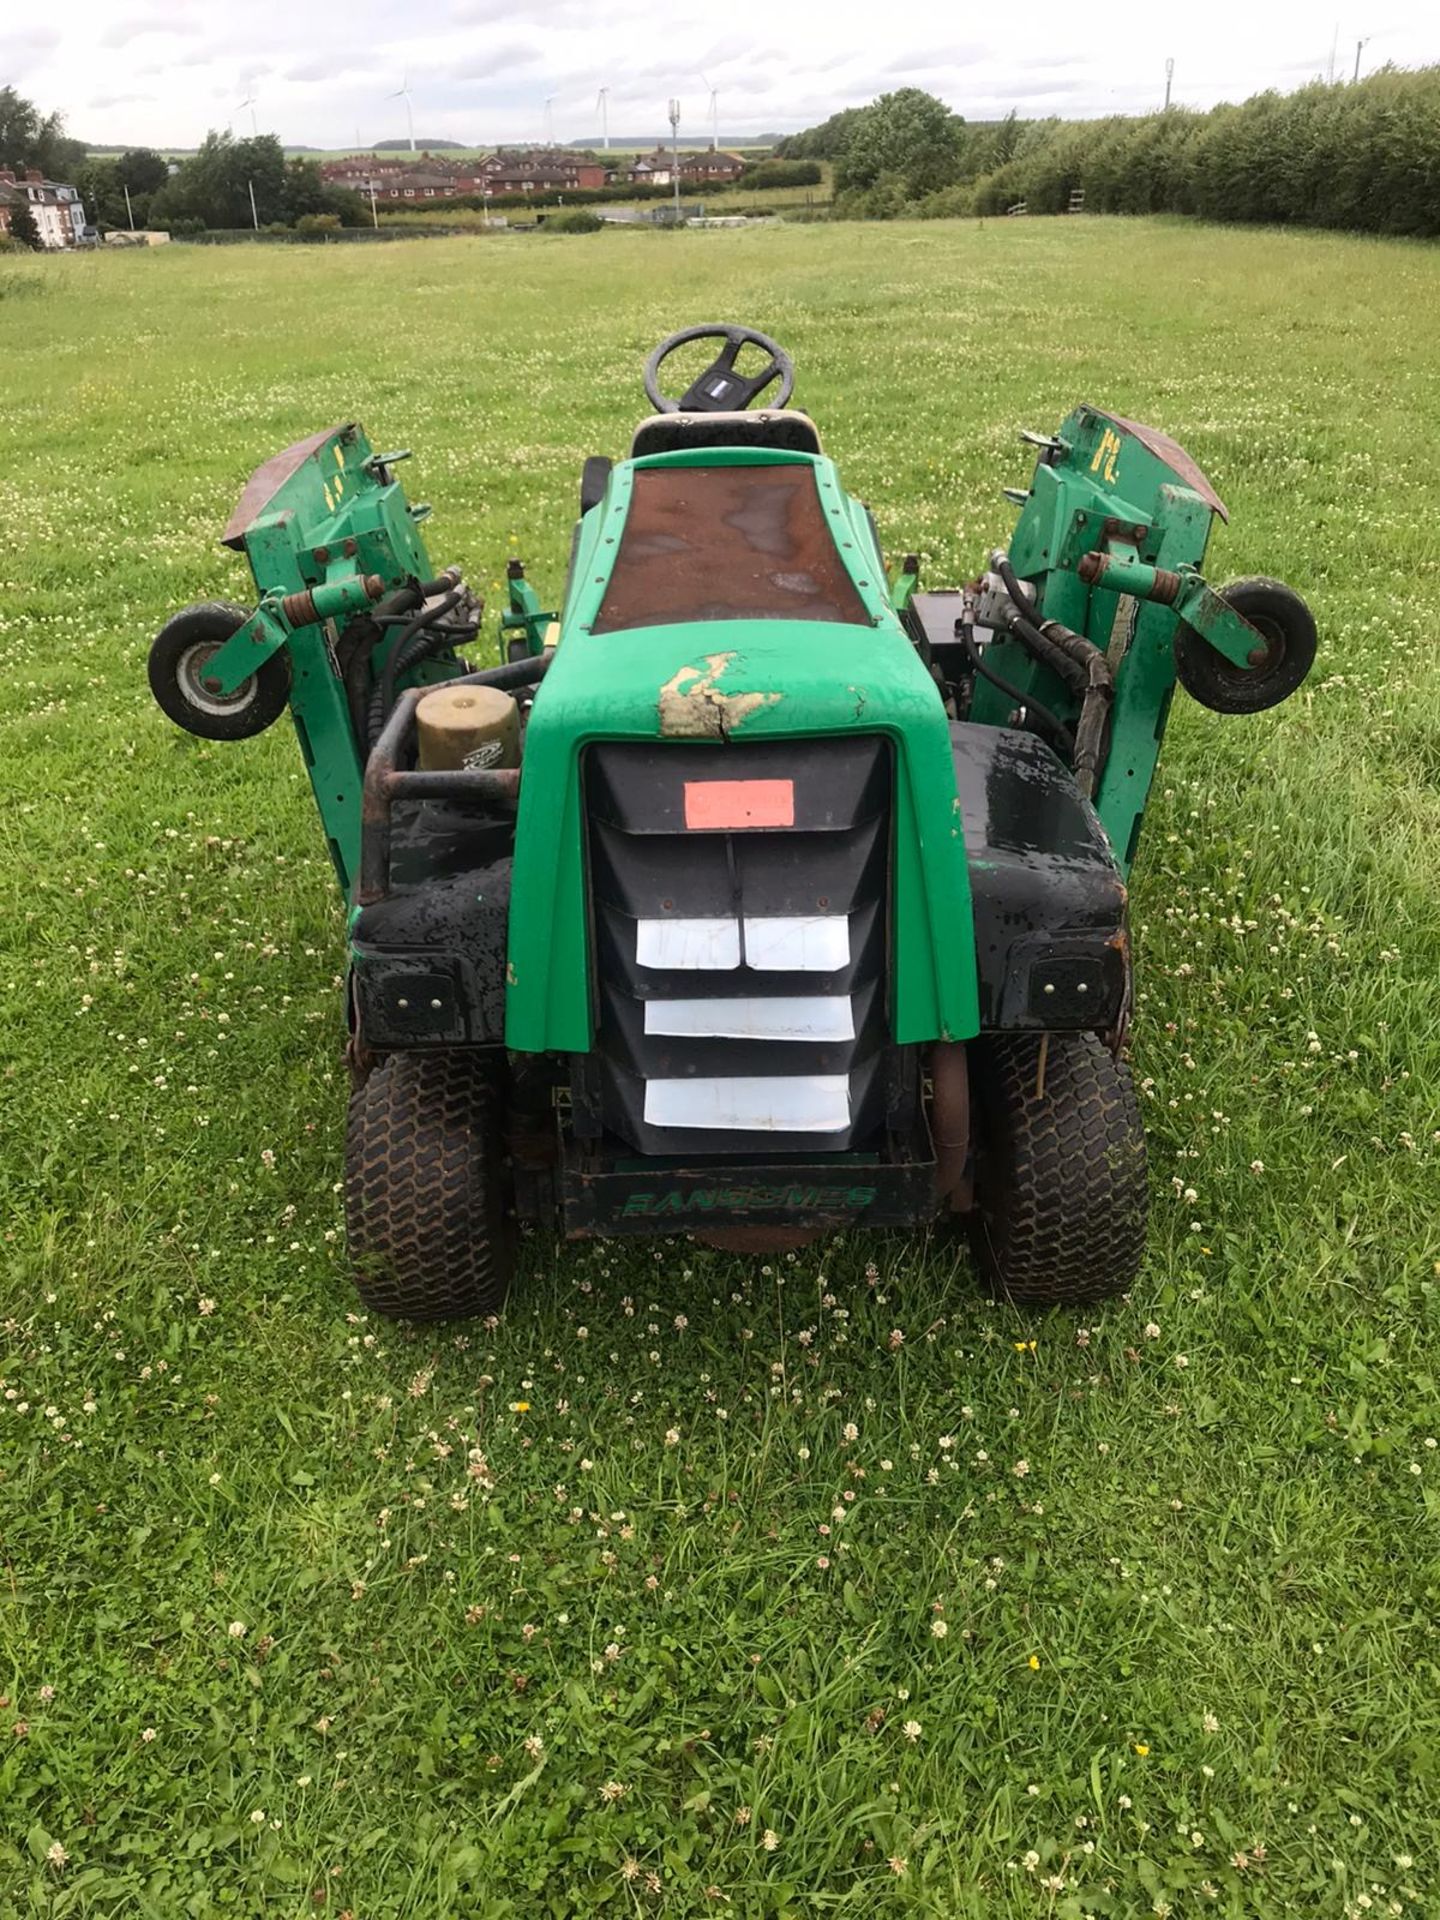 RANSOMES HR6010 BATWING RIDE ON LAWN MOWER, YEAR 2007, ONLY DONE 3431 HOURS *NO VAT* - Image 7 of 13